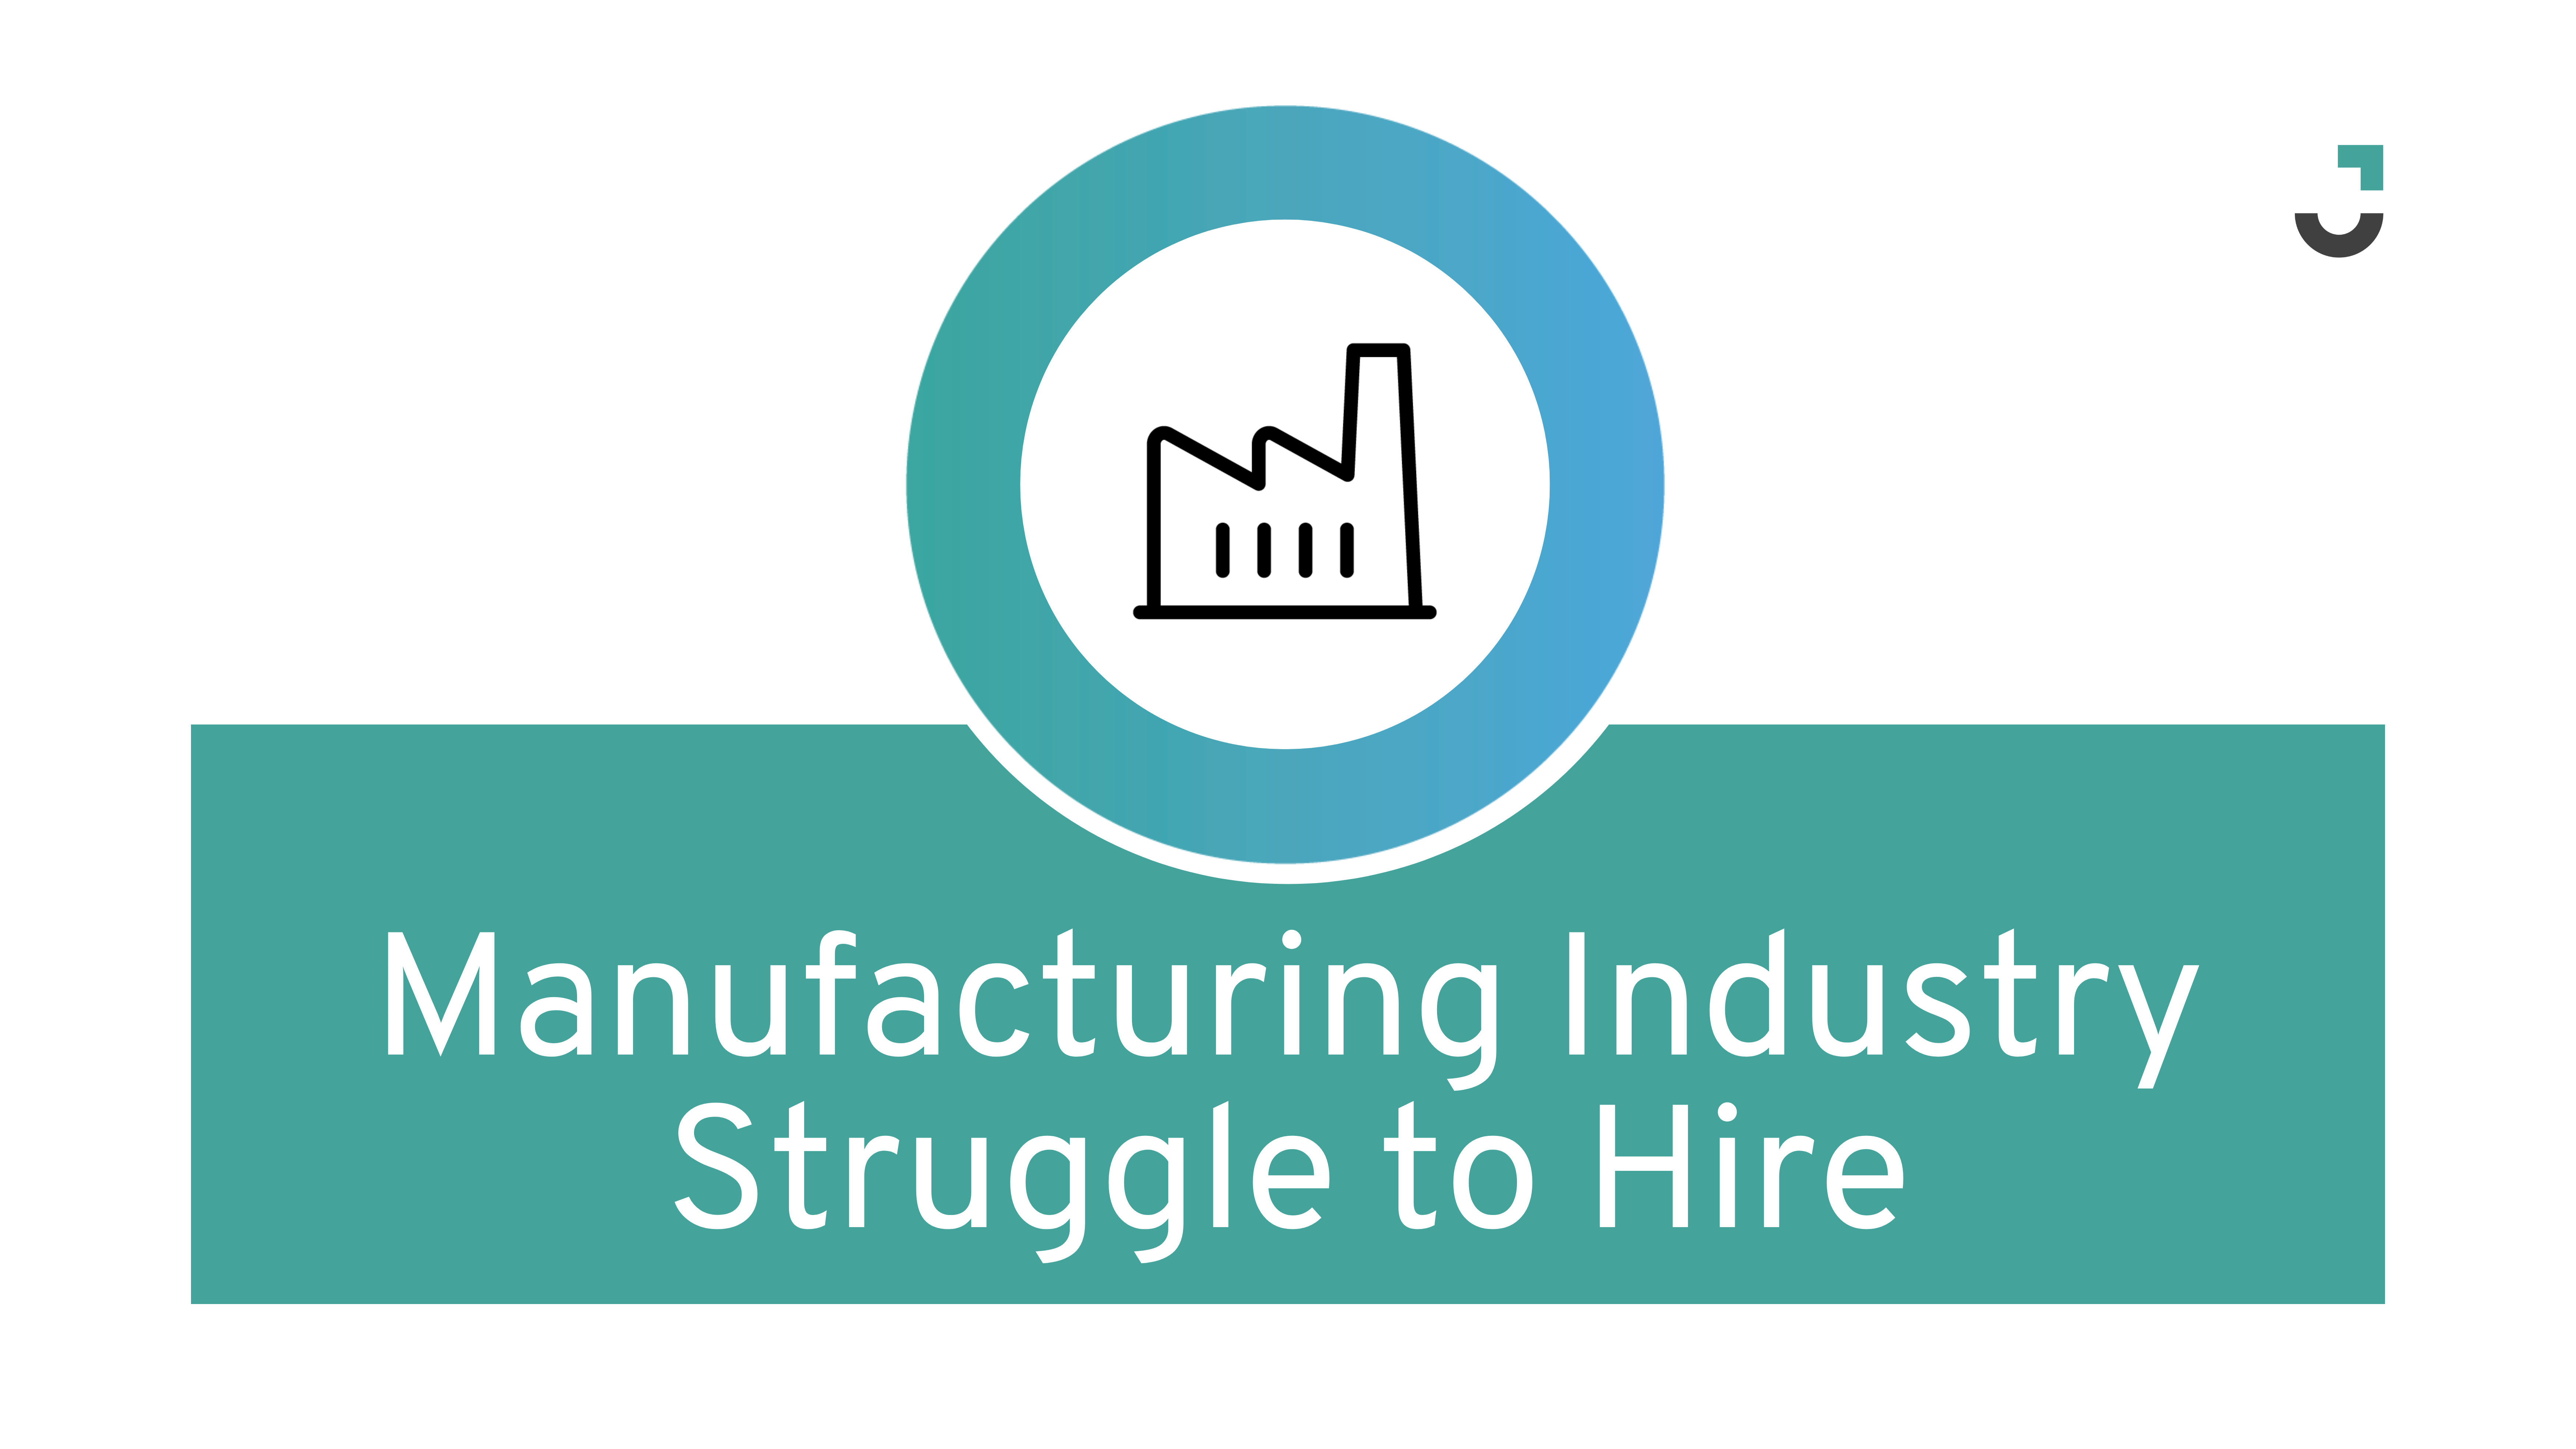 The Manufacturing Industry's Struggle to Hire